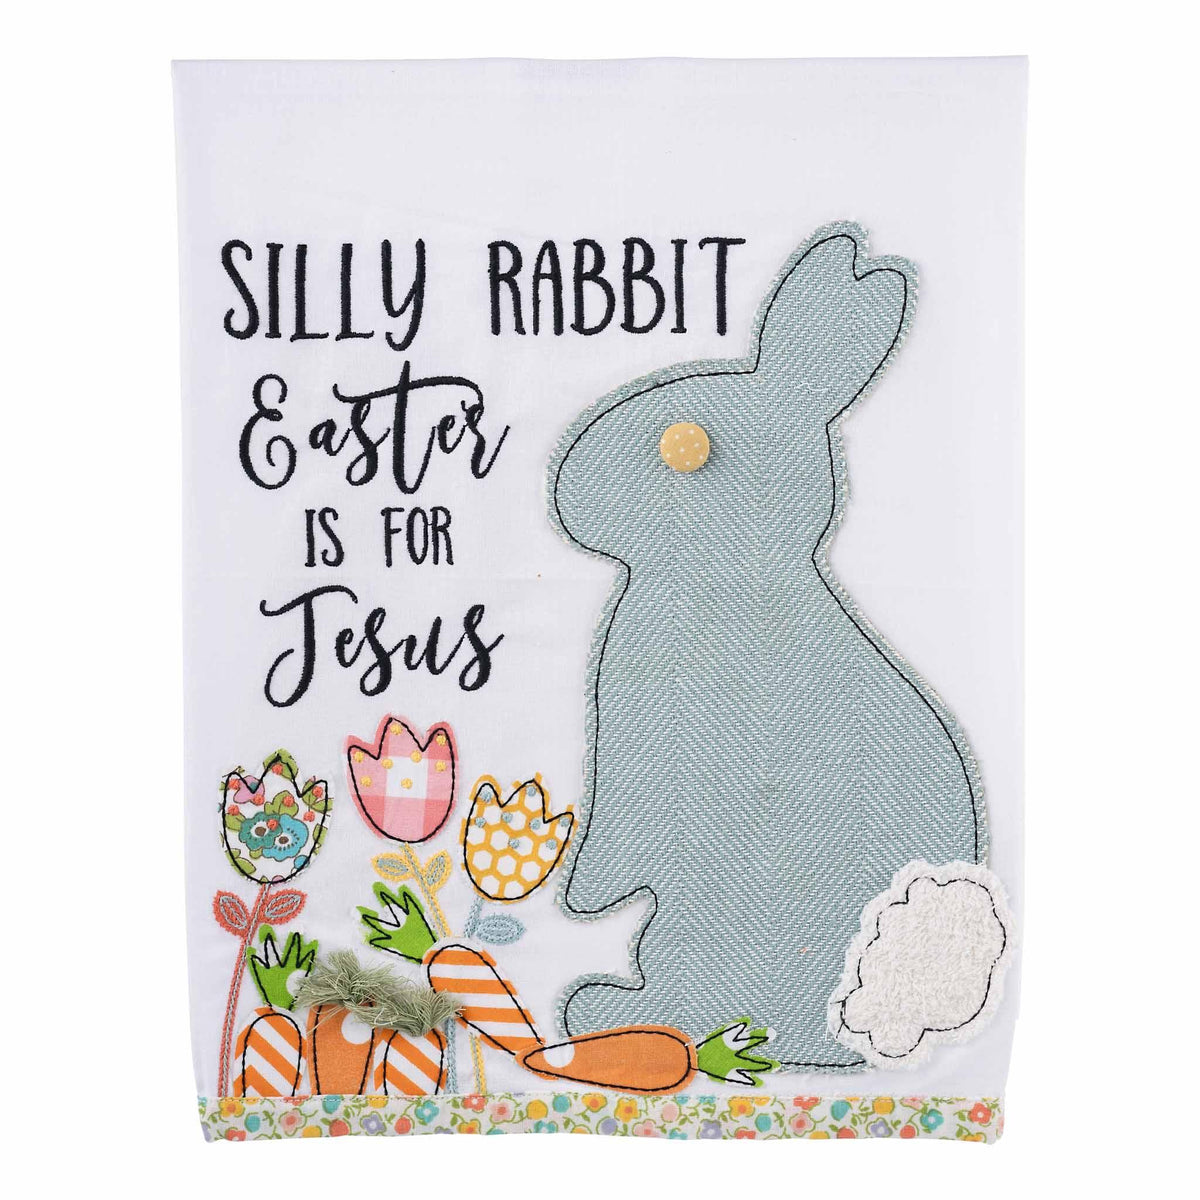 Silly Rabbit Carrot Patch Tea Towel - GLORY HAUS 